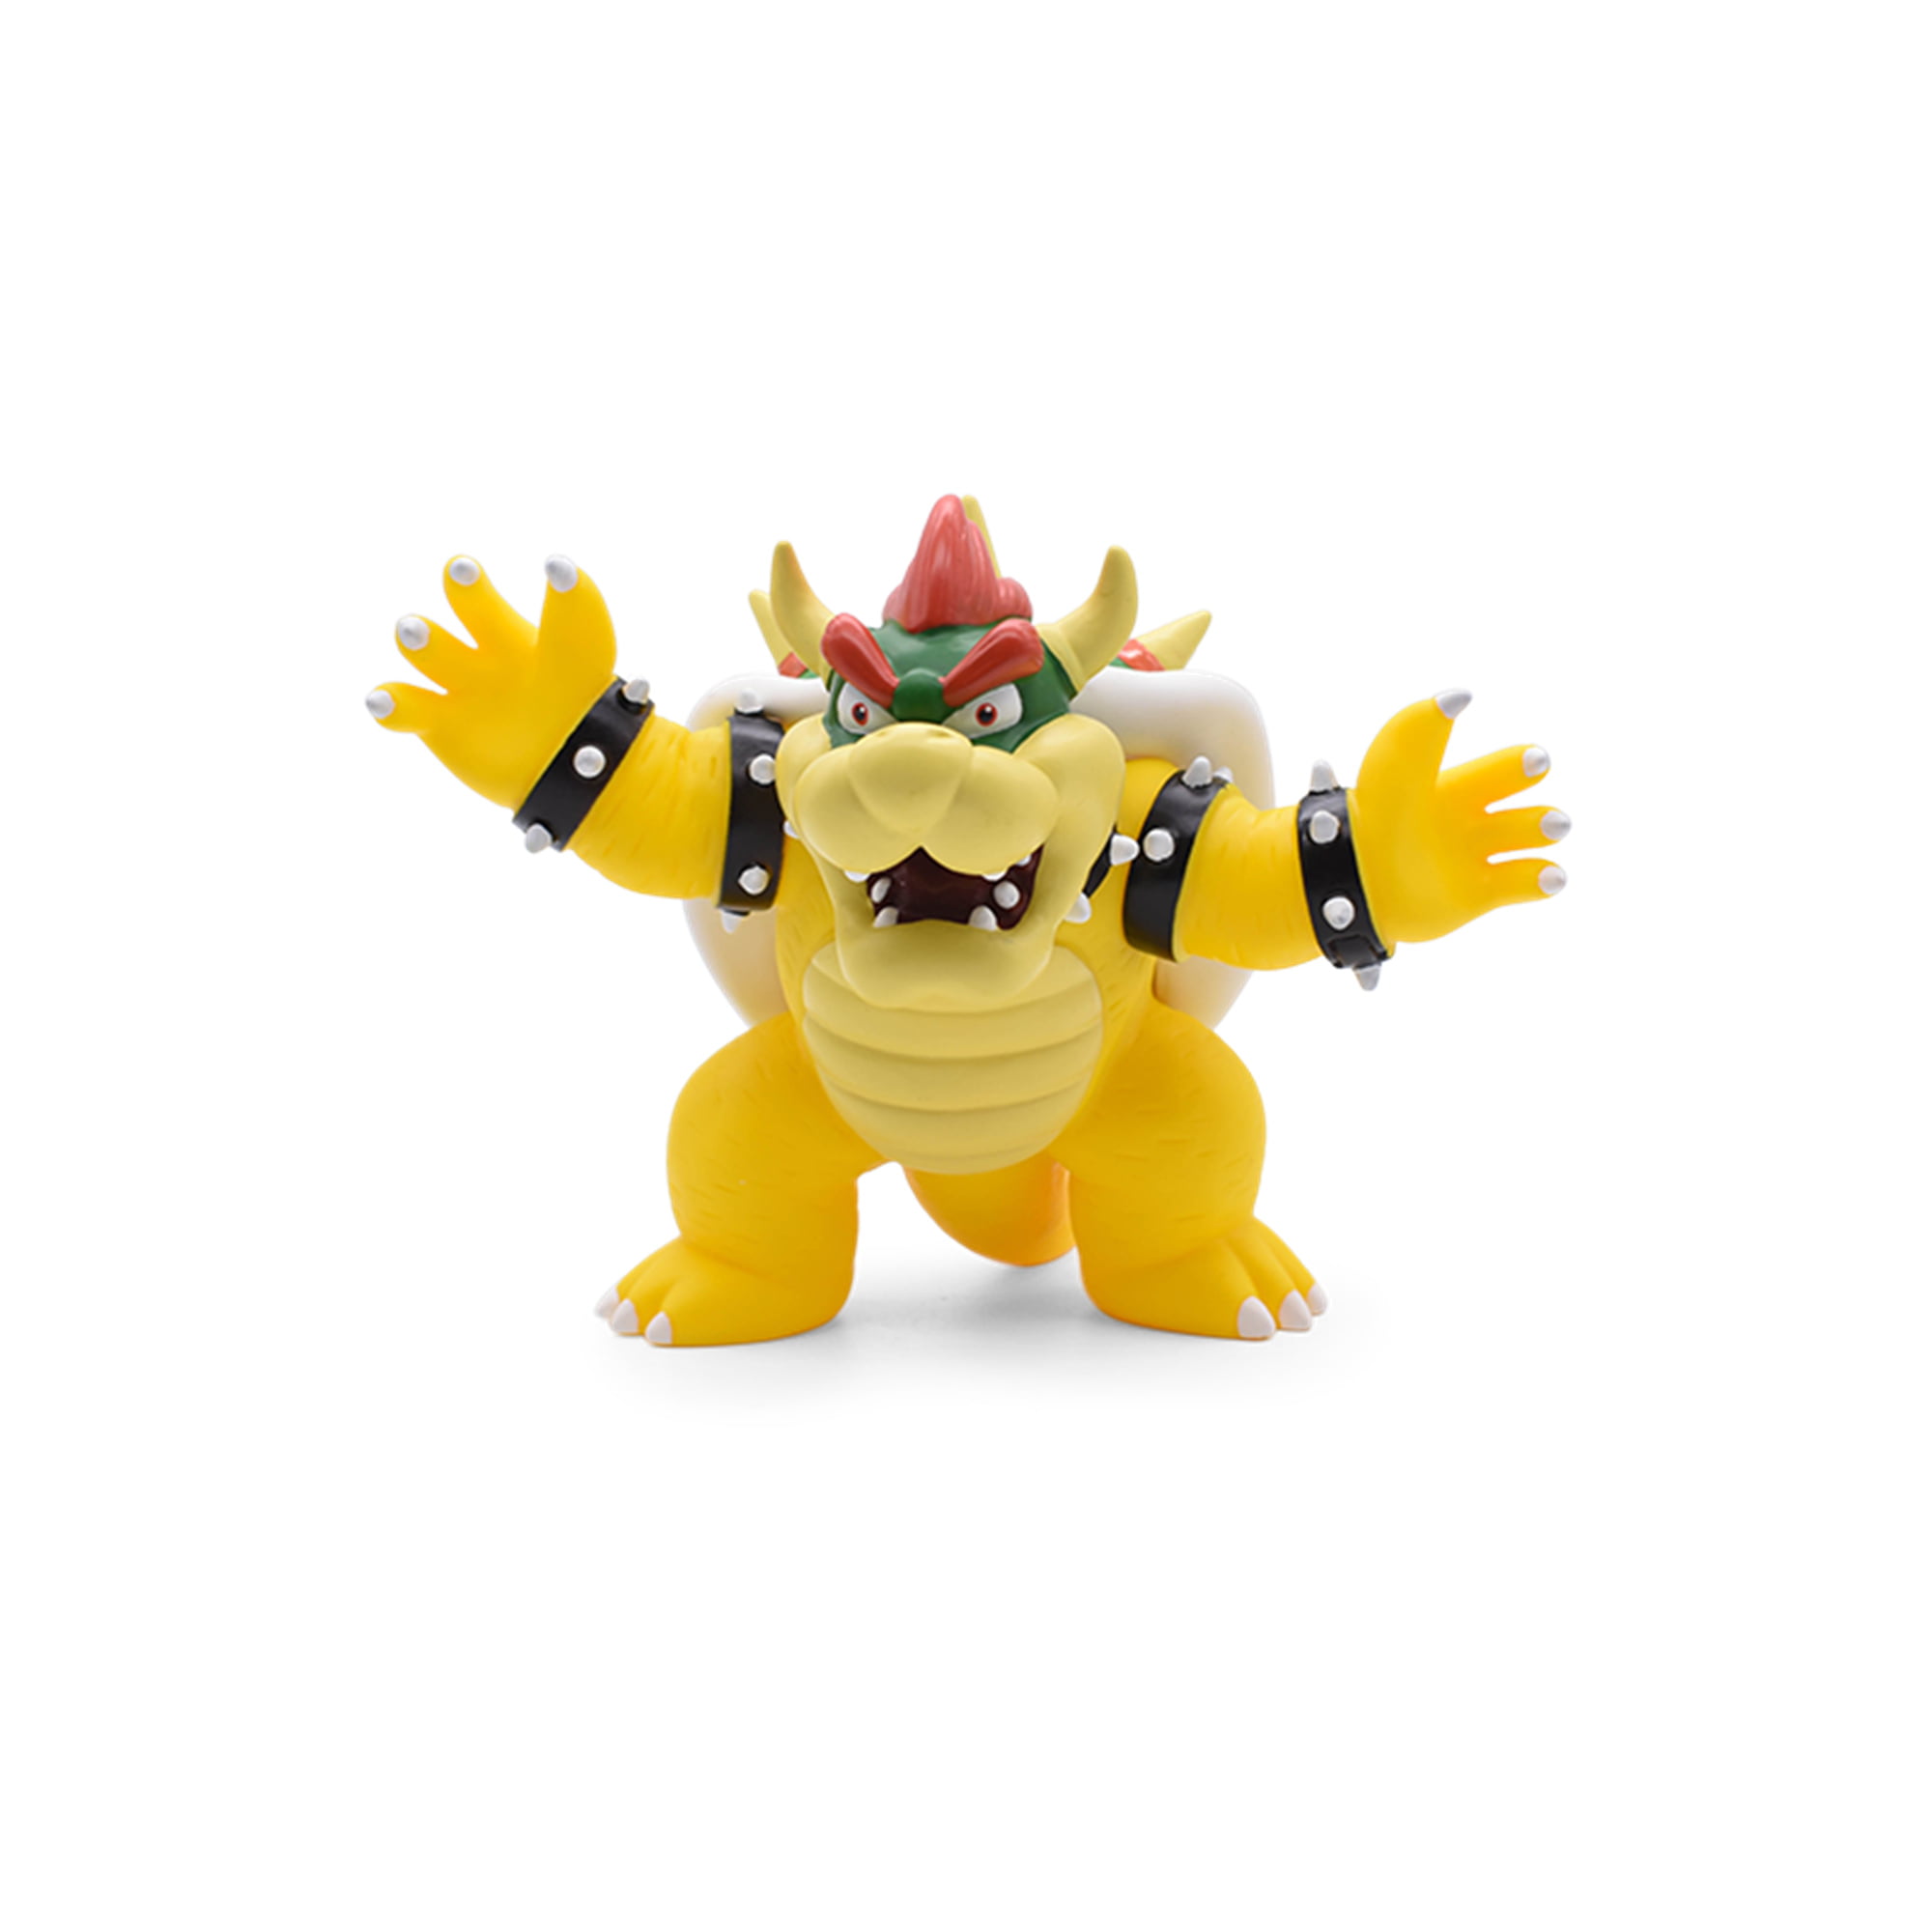 New Super Mario Bros Bowser Koopa Plastic PVC Figure Doll Toy Collectible 9" 4" 